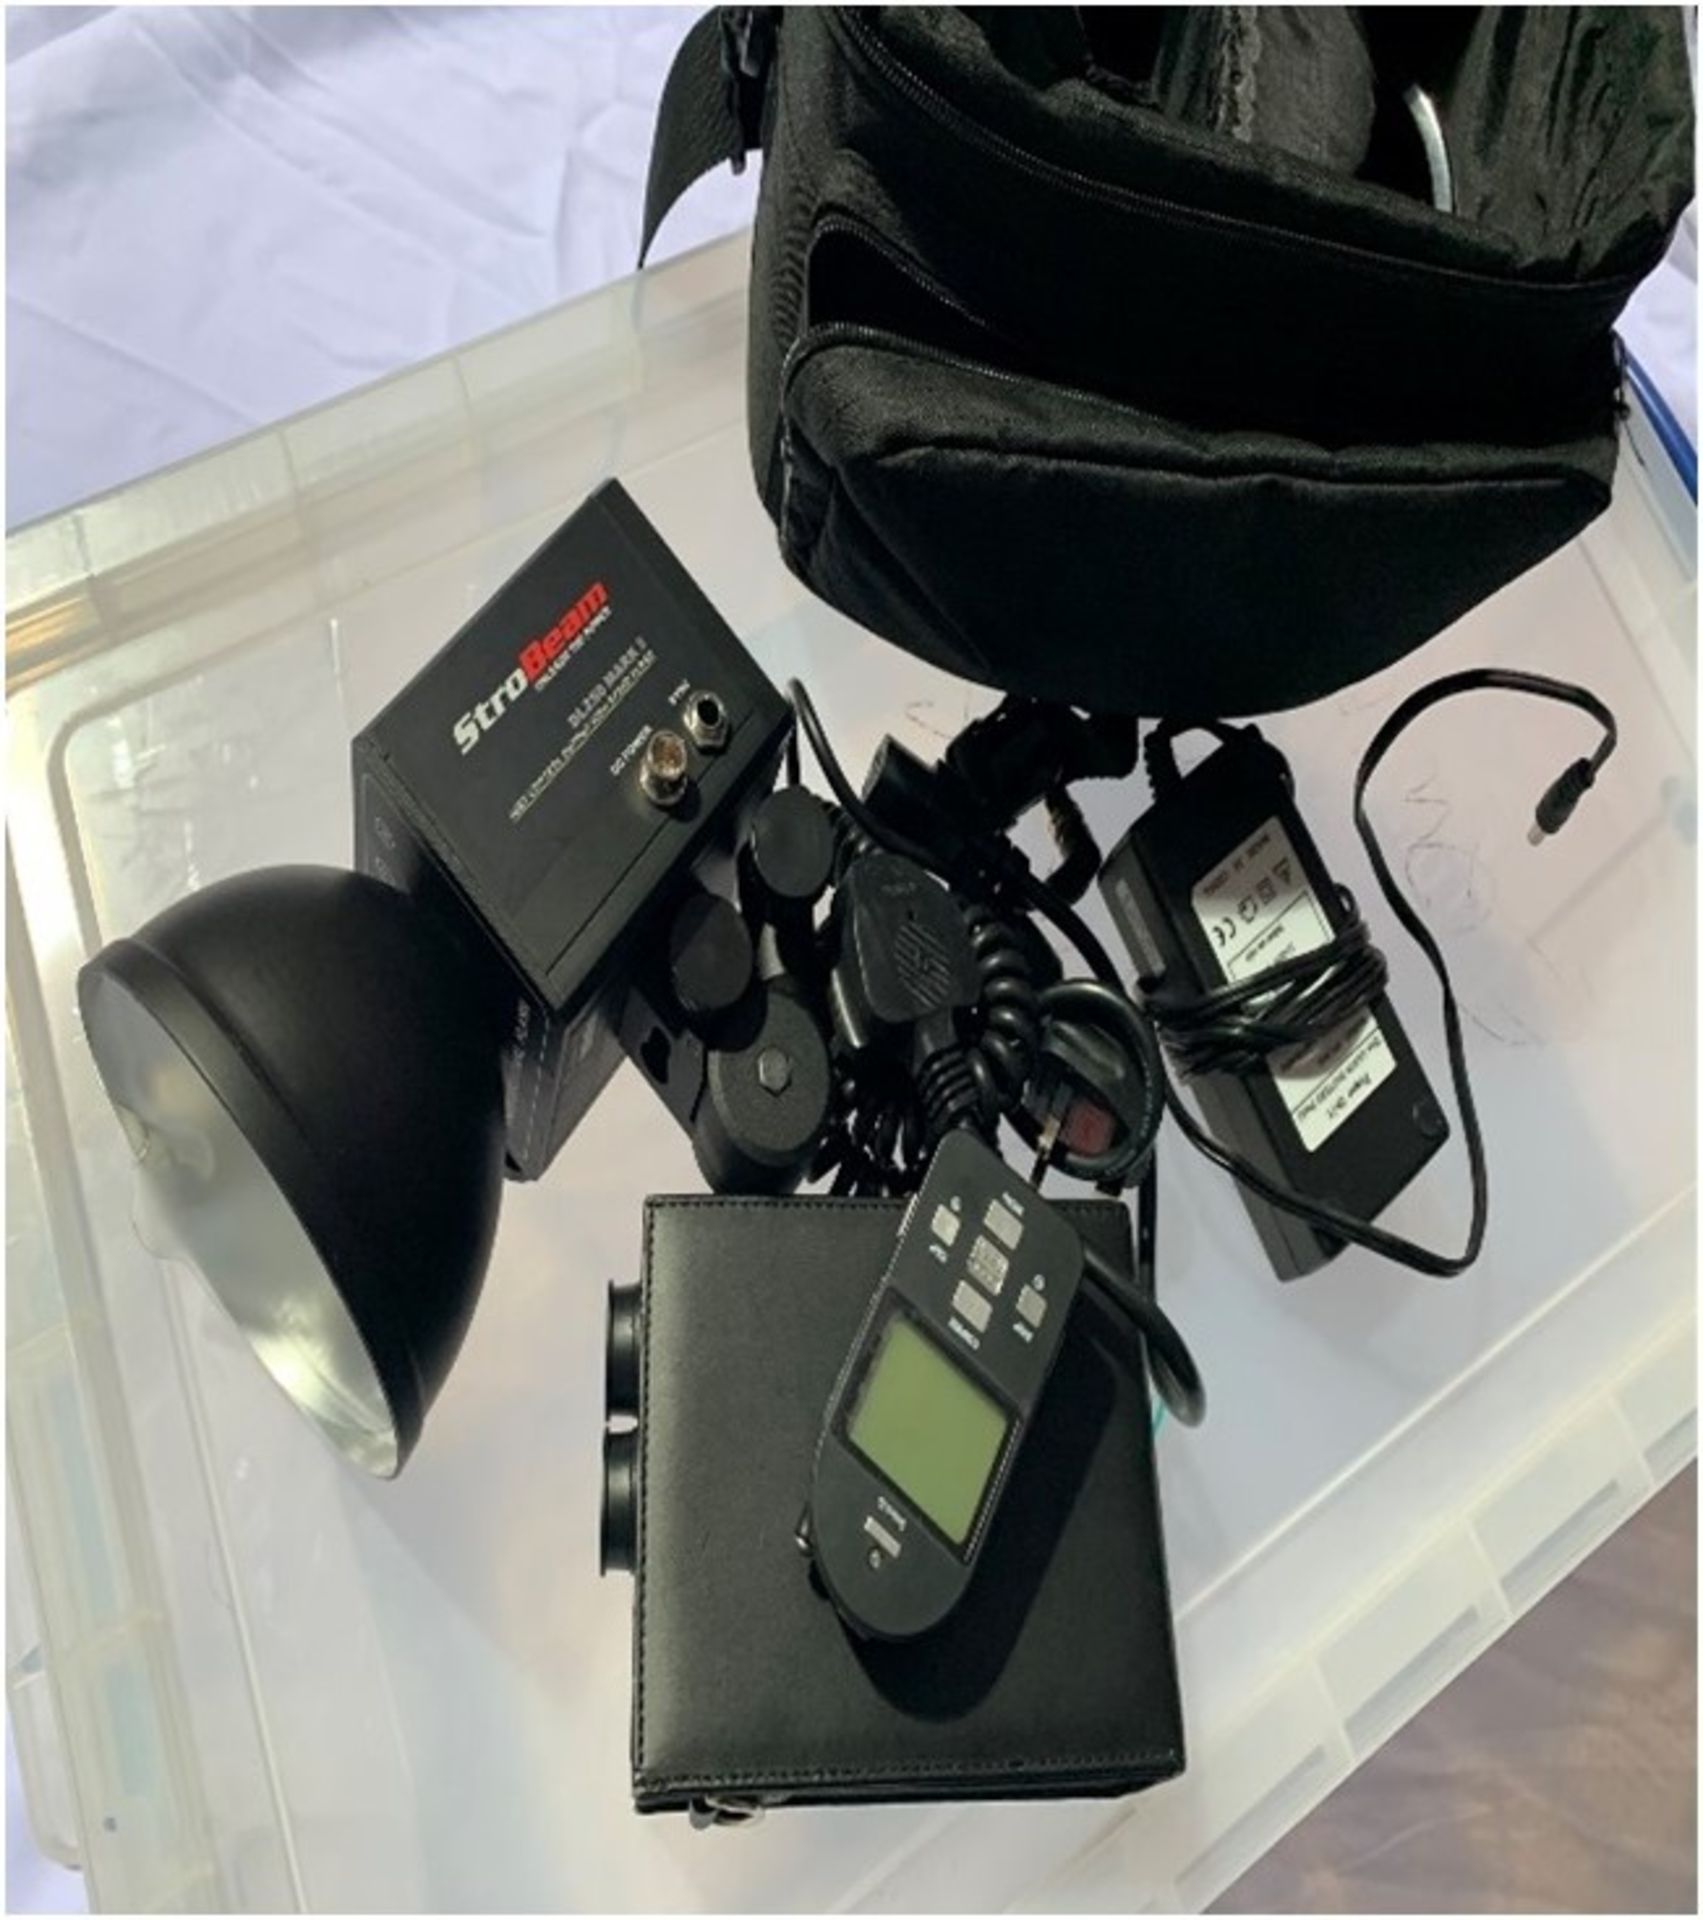 2 x StroBeam DL 250 MARK II Portable Photography Flash Lights With Power Packs, Remote Trigger And